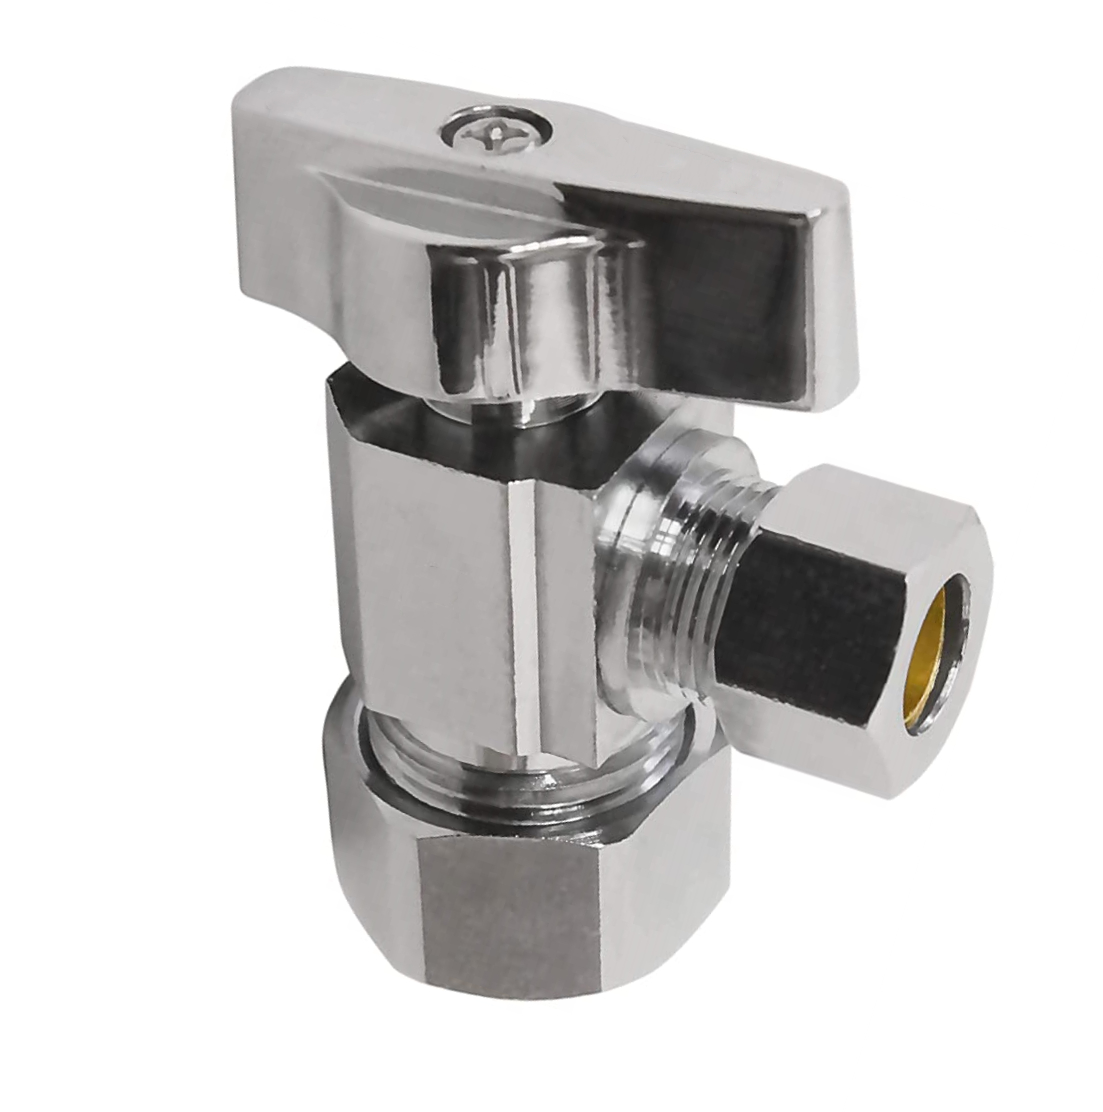 Heavy Duty Square Body 5/8" OD Comp. (1/2 in. Nominal) x 3/8" O.D. Comp. Chrome Plated Angle Stop Valve, 1/4-Turn Lead Free